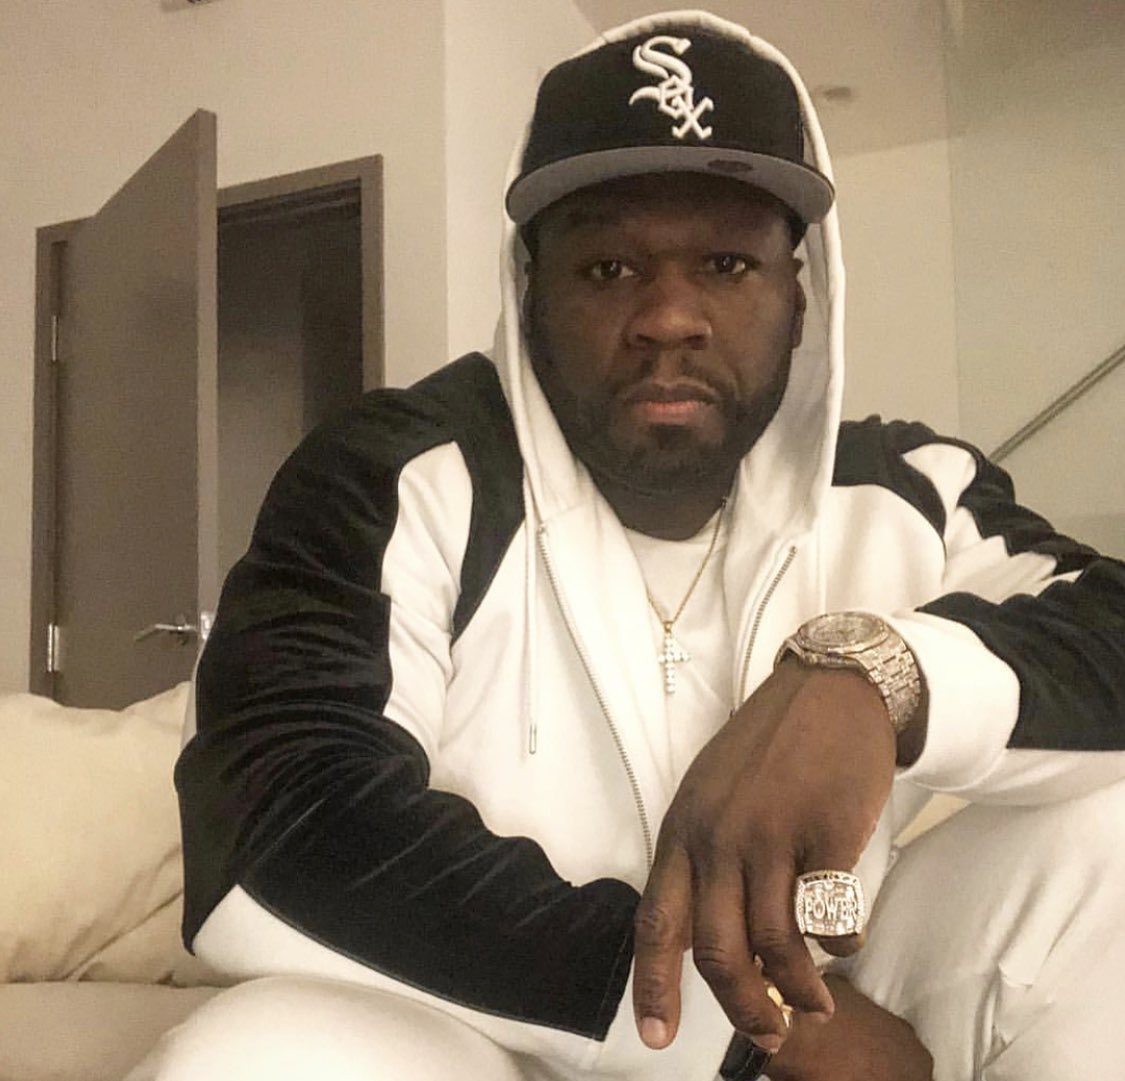 Chilling, hey if you see me out in about and you follow me say what up Fif..  Positive vibes. #lecheminduroi https://t.co/lIUgDTOoj7